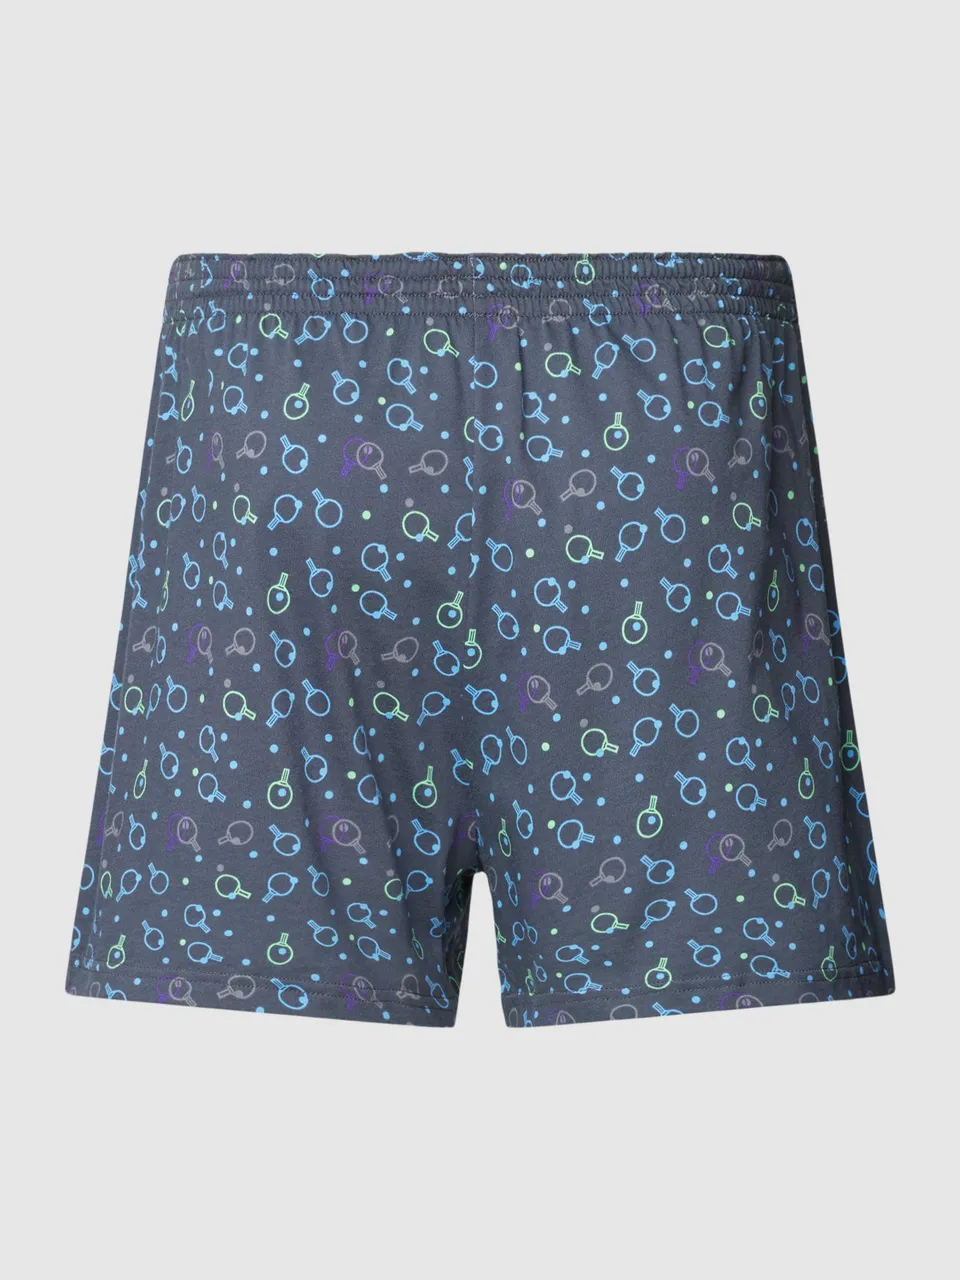 Boxershorts mit Allover-Muster